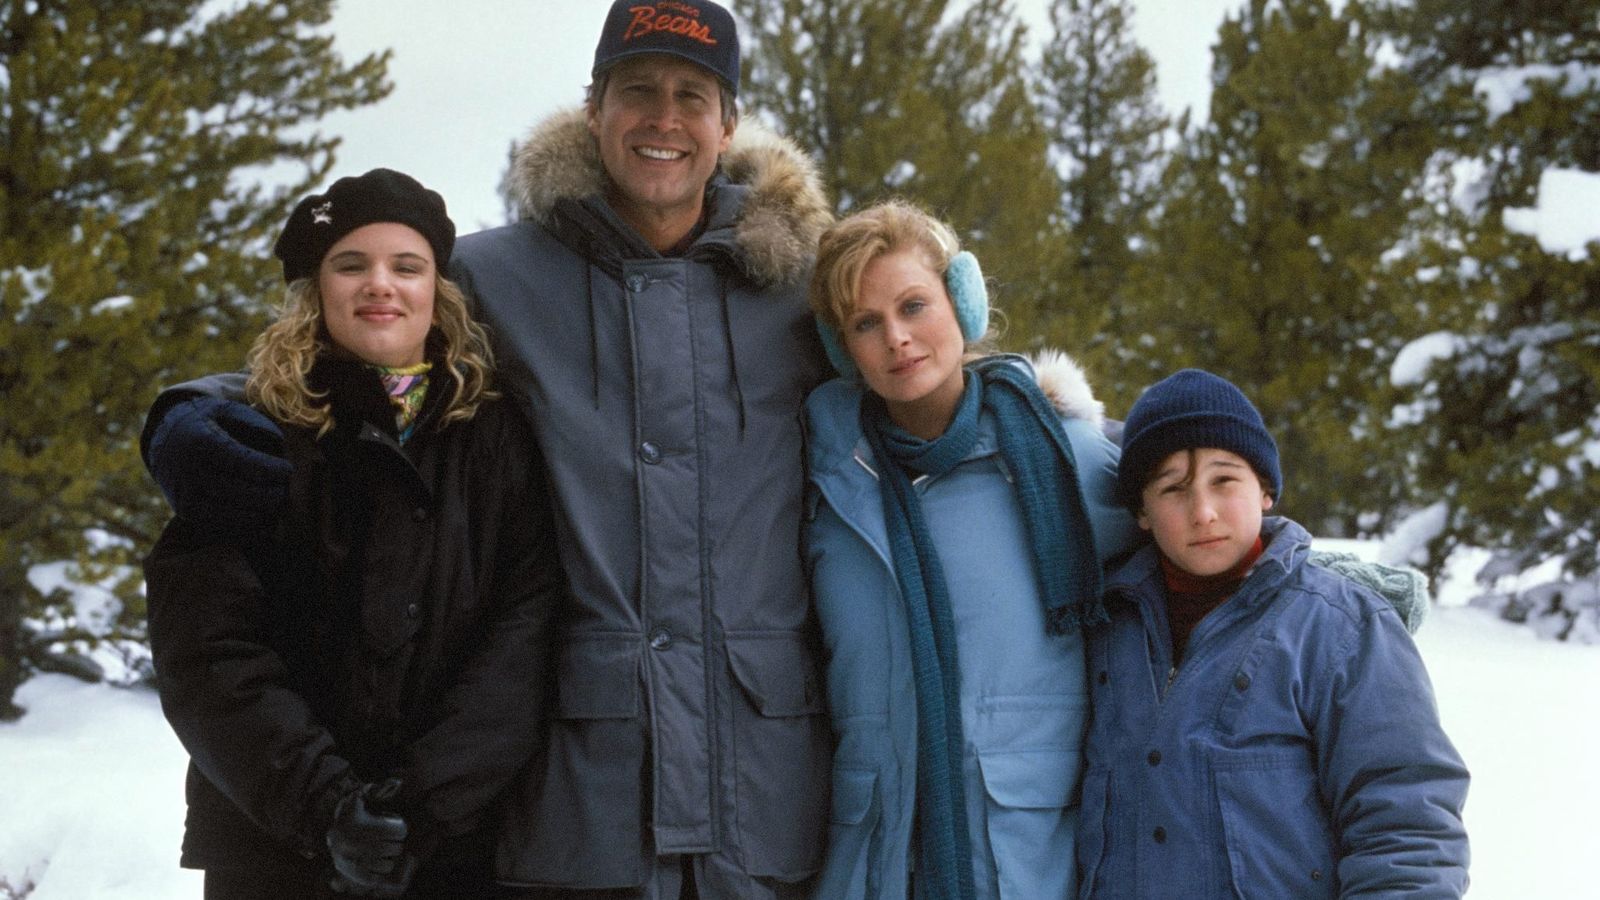 Clark Griswold Chevy Chase Christmas Vacation Chicago BlackHawks